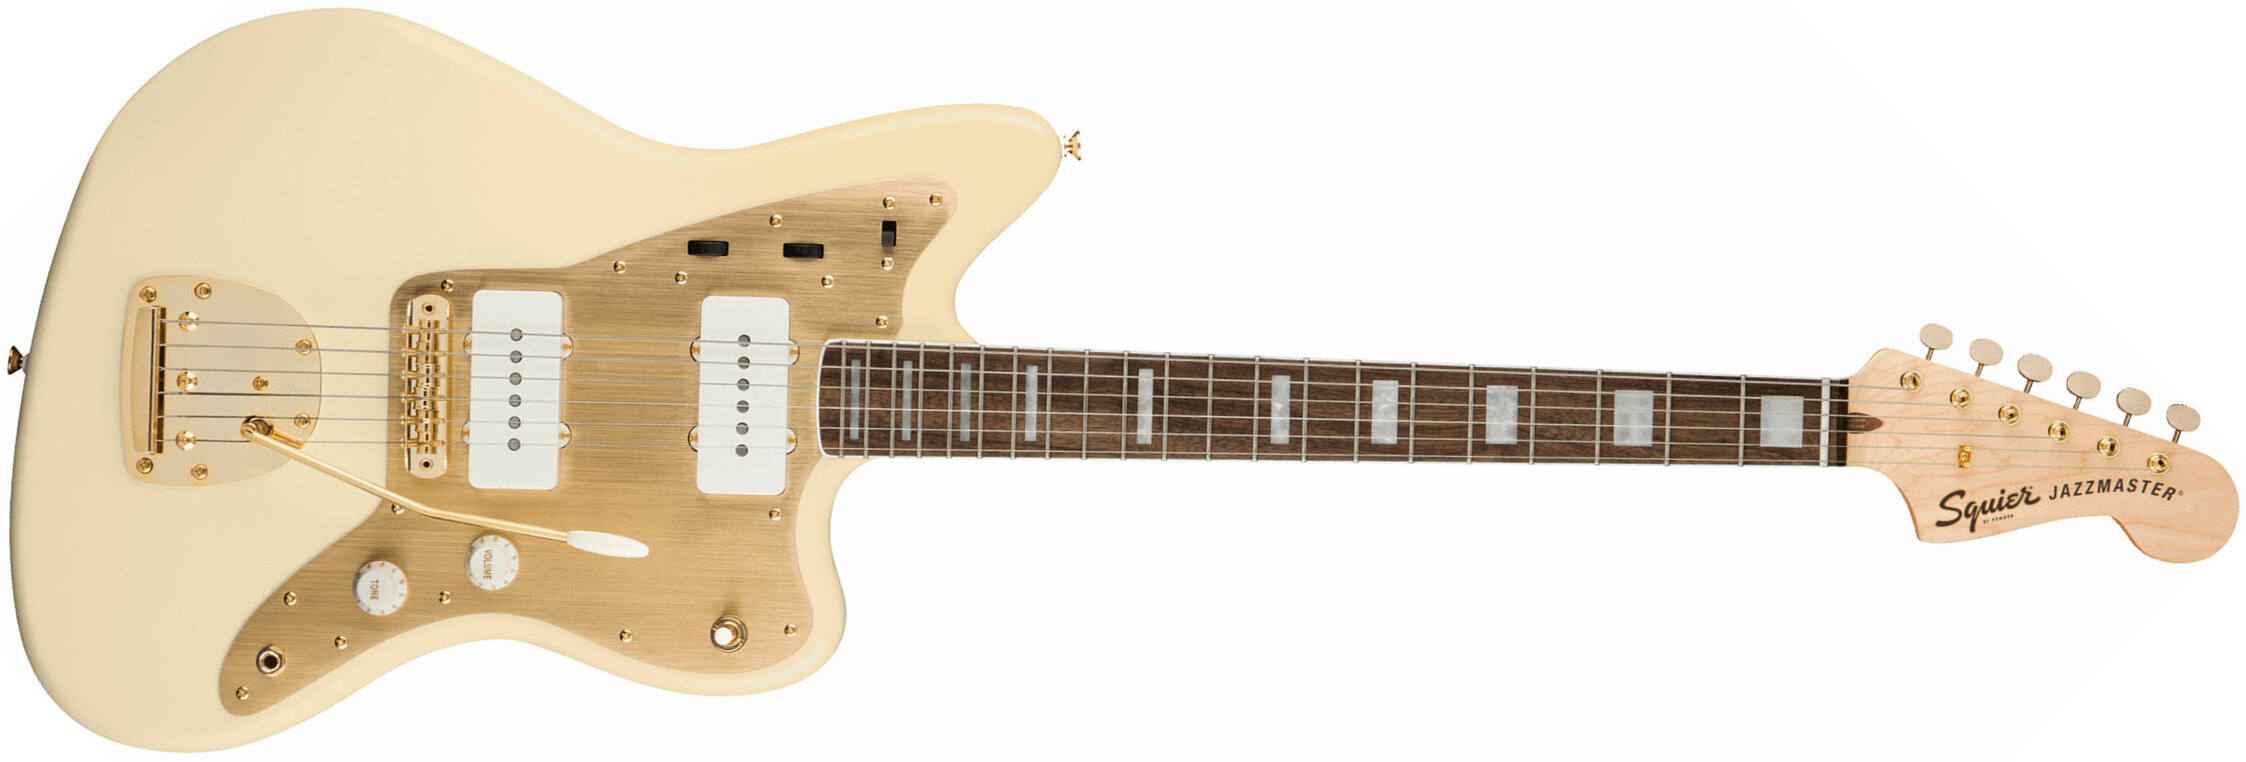 Squier Jazzmaster 40th Anniversary Gold Edition Lau - Olympic White - Guitarra electrica retro rock - Main picture